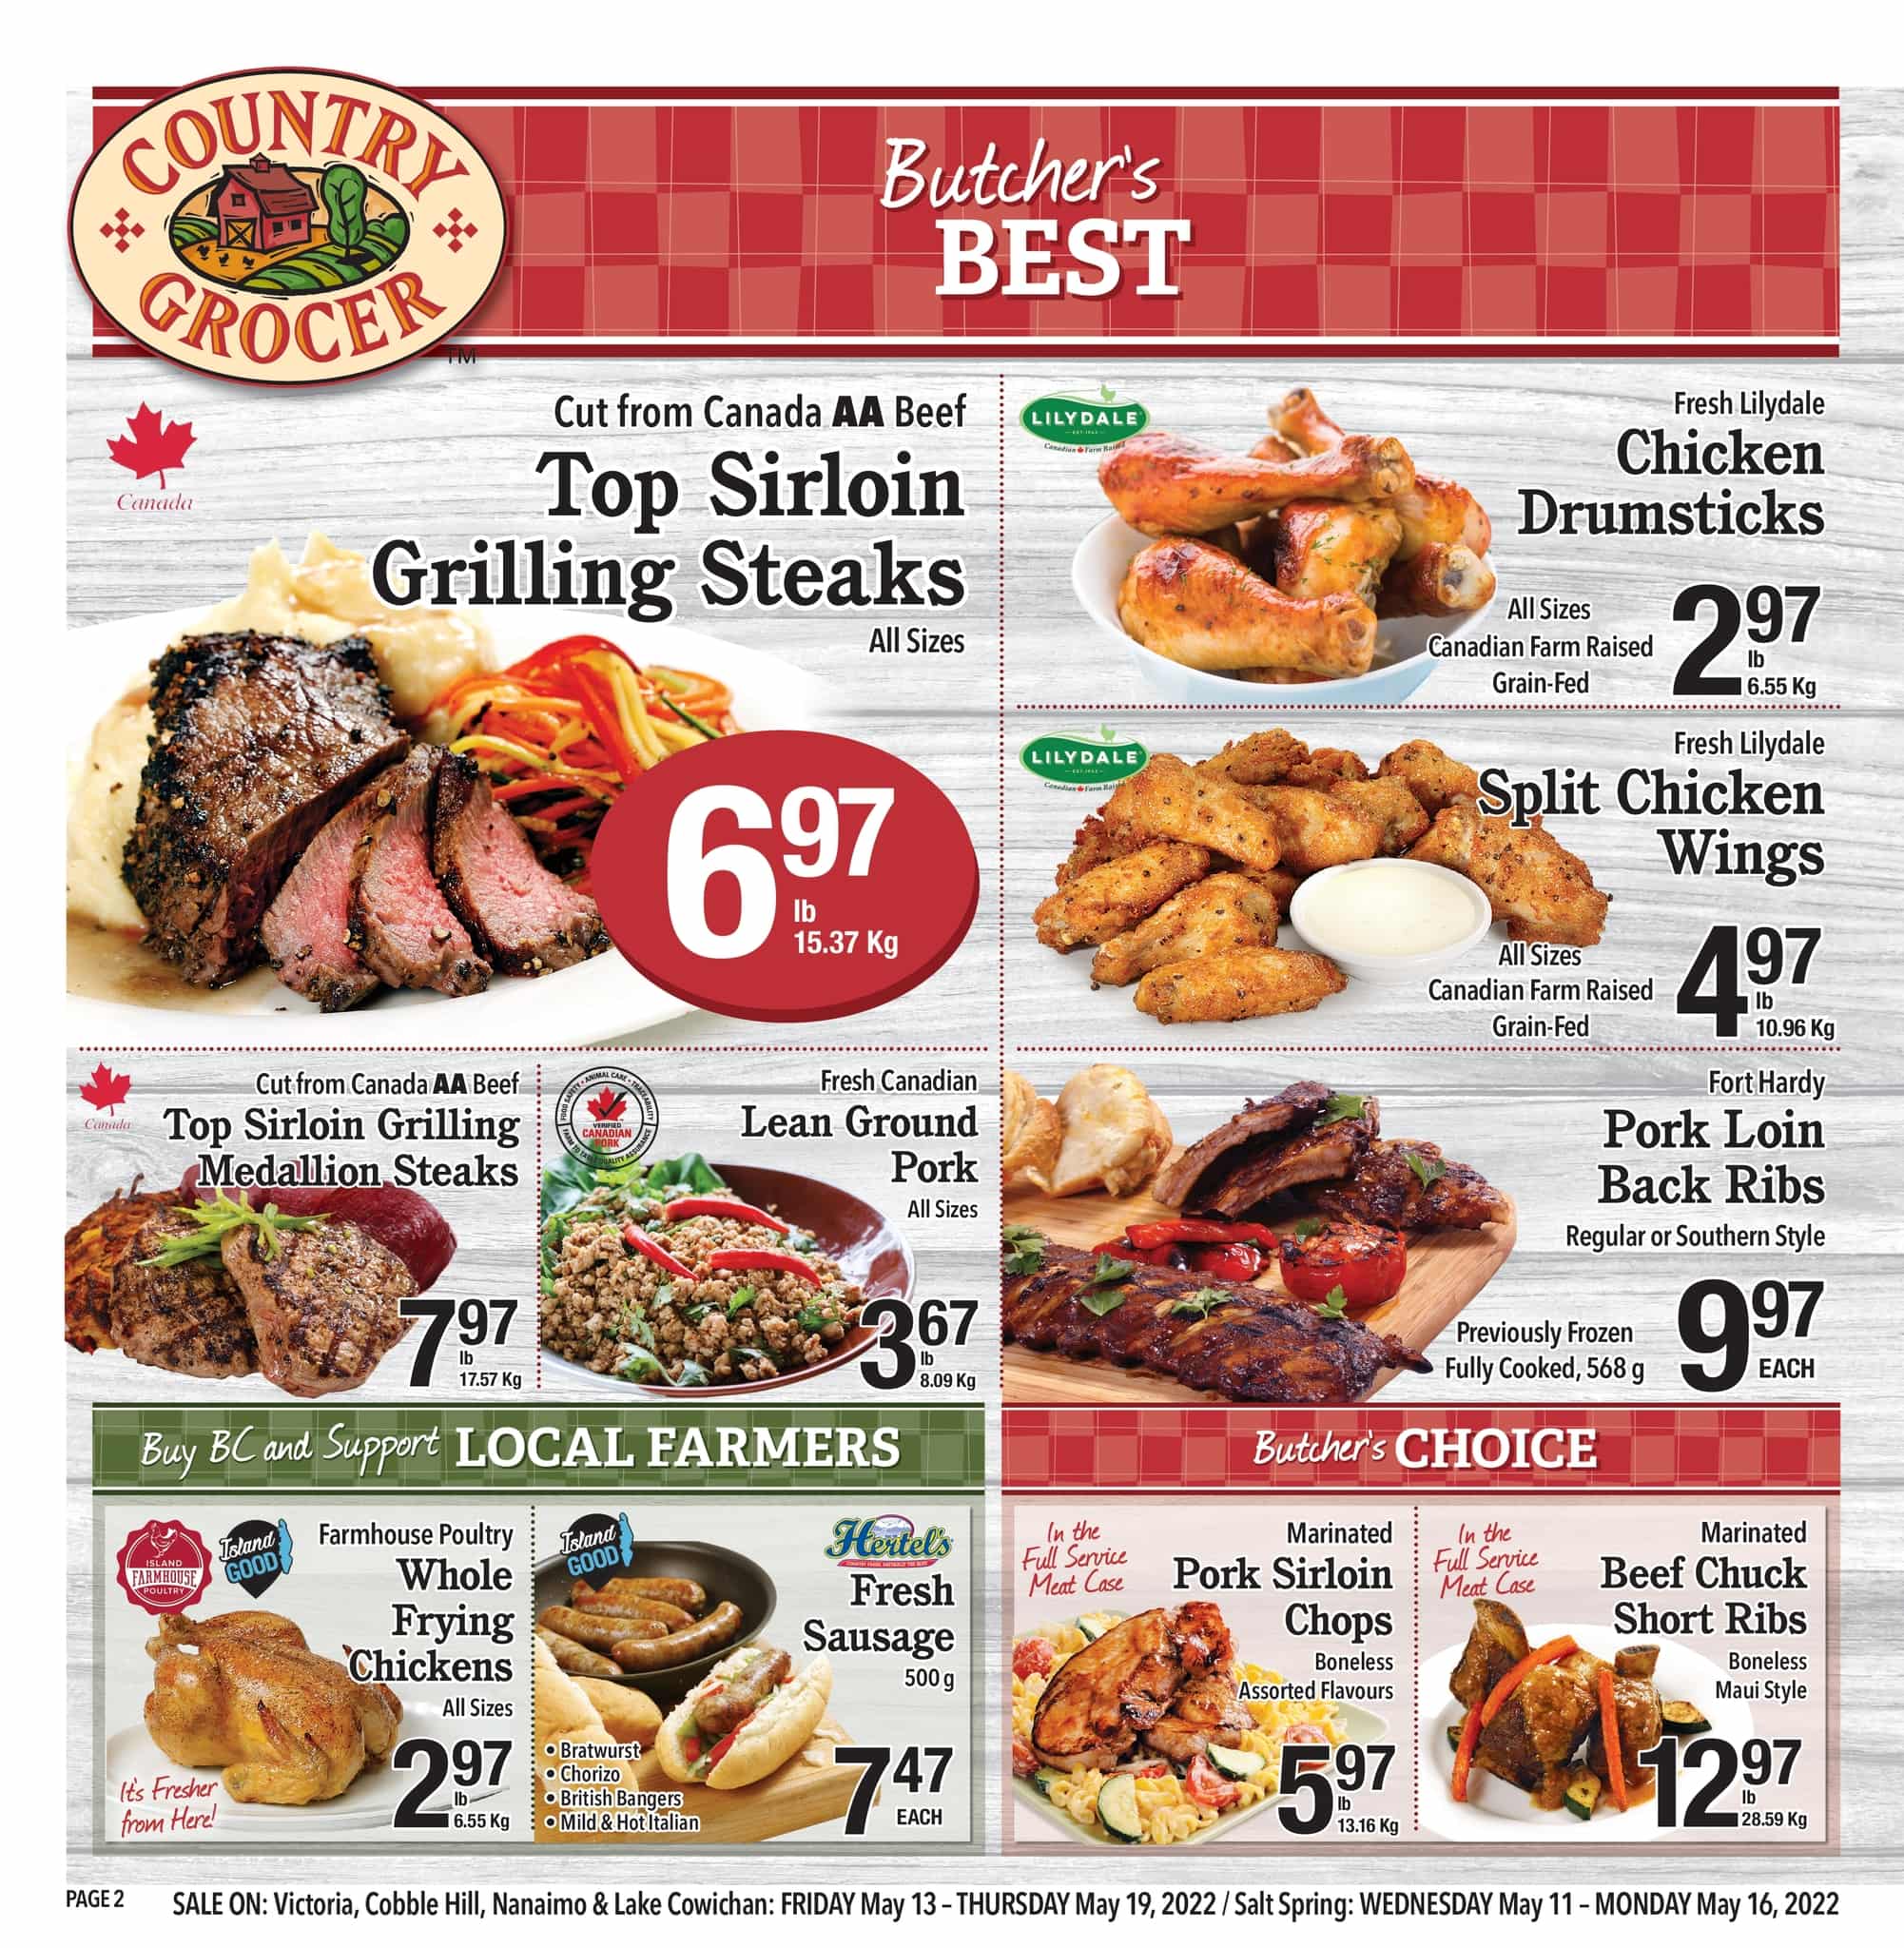 Country Grocer - Weekly Flyer Specials - Page 2